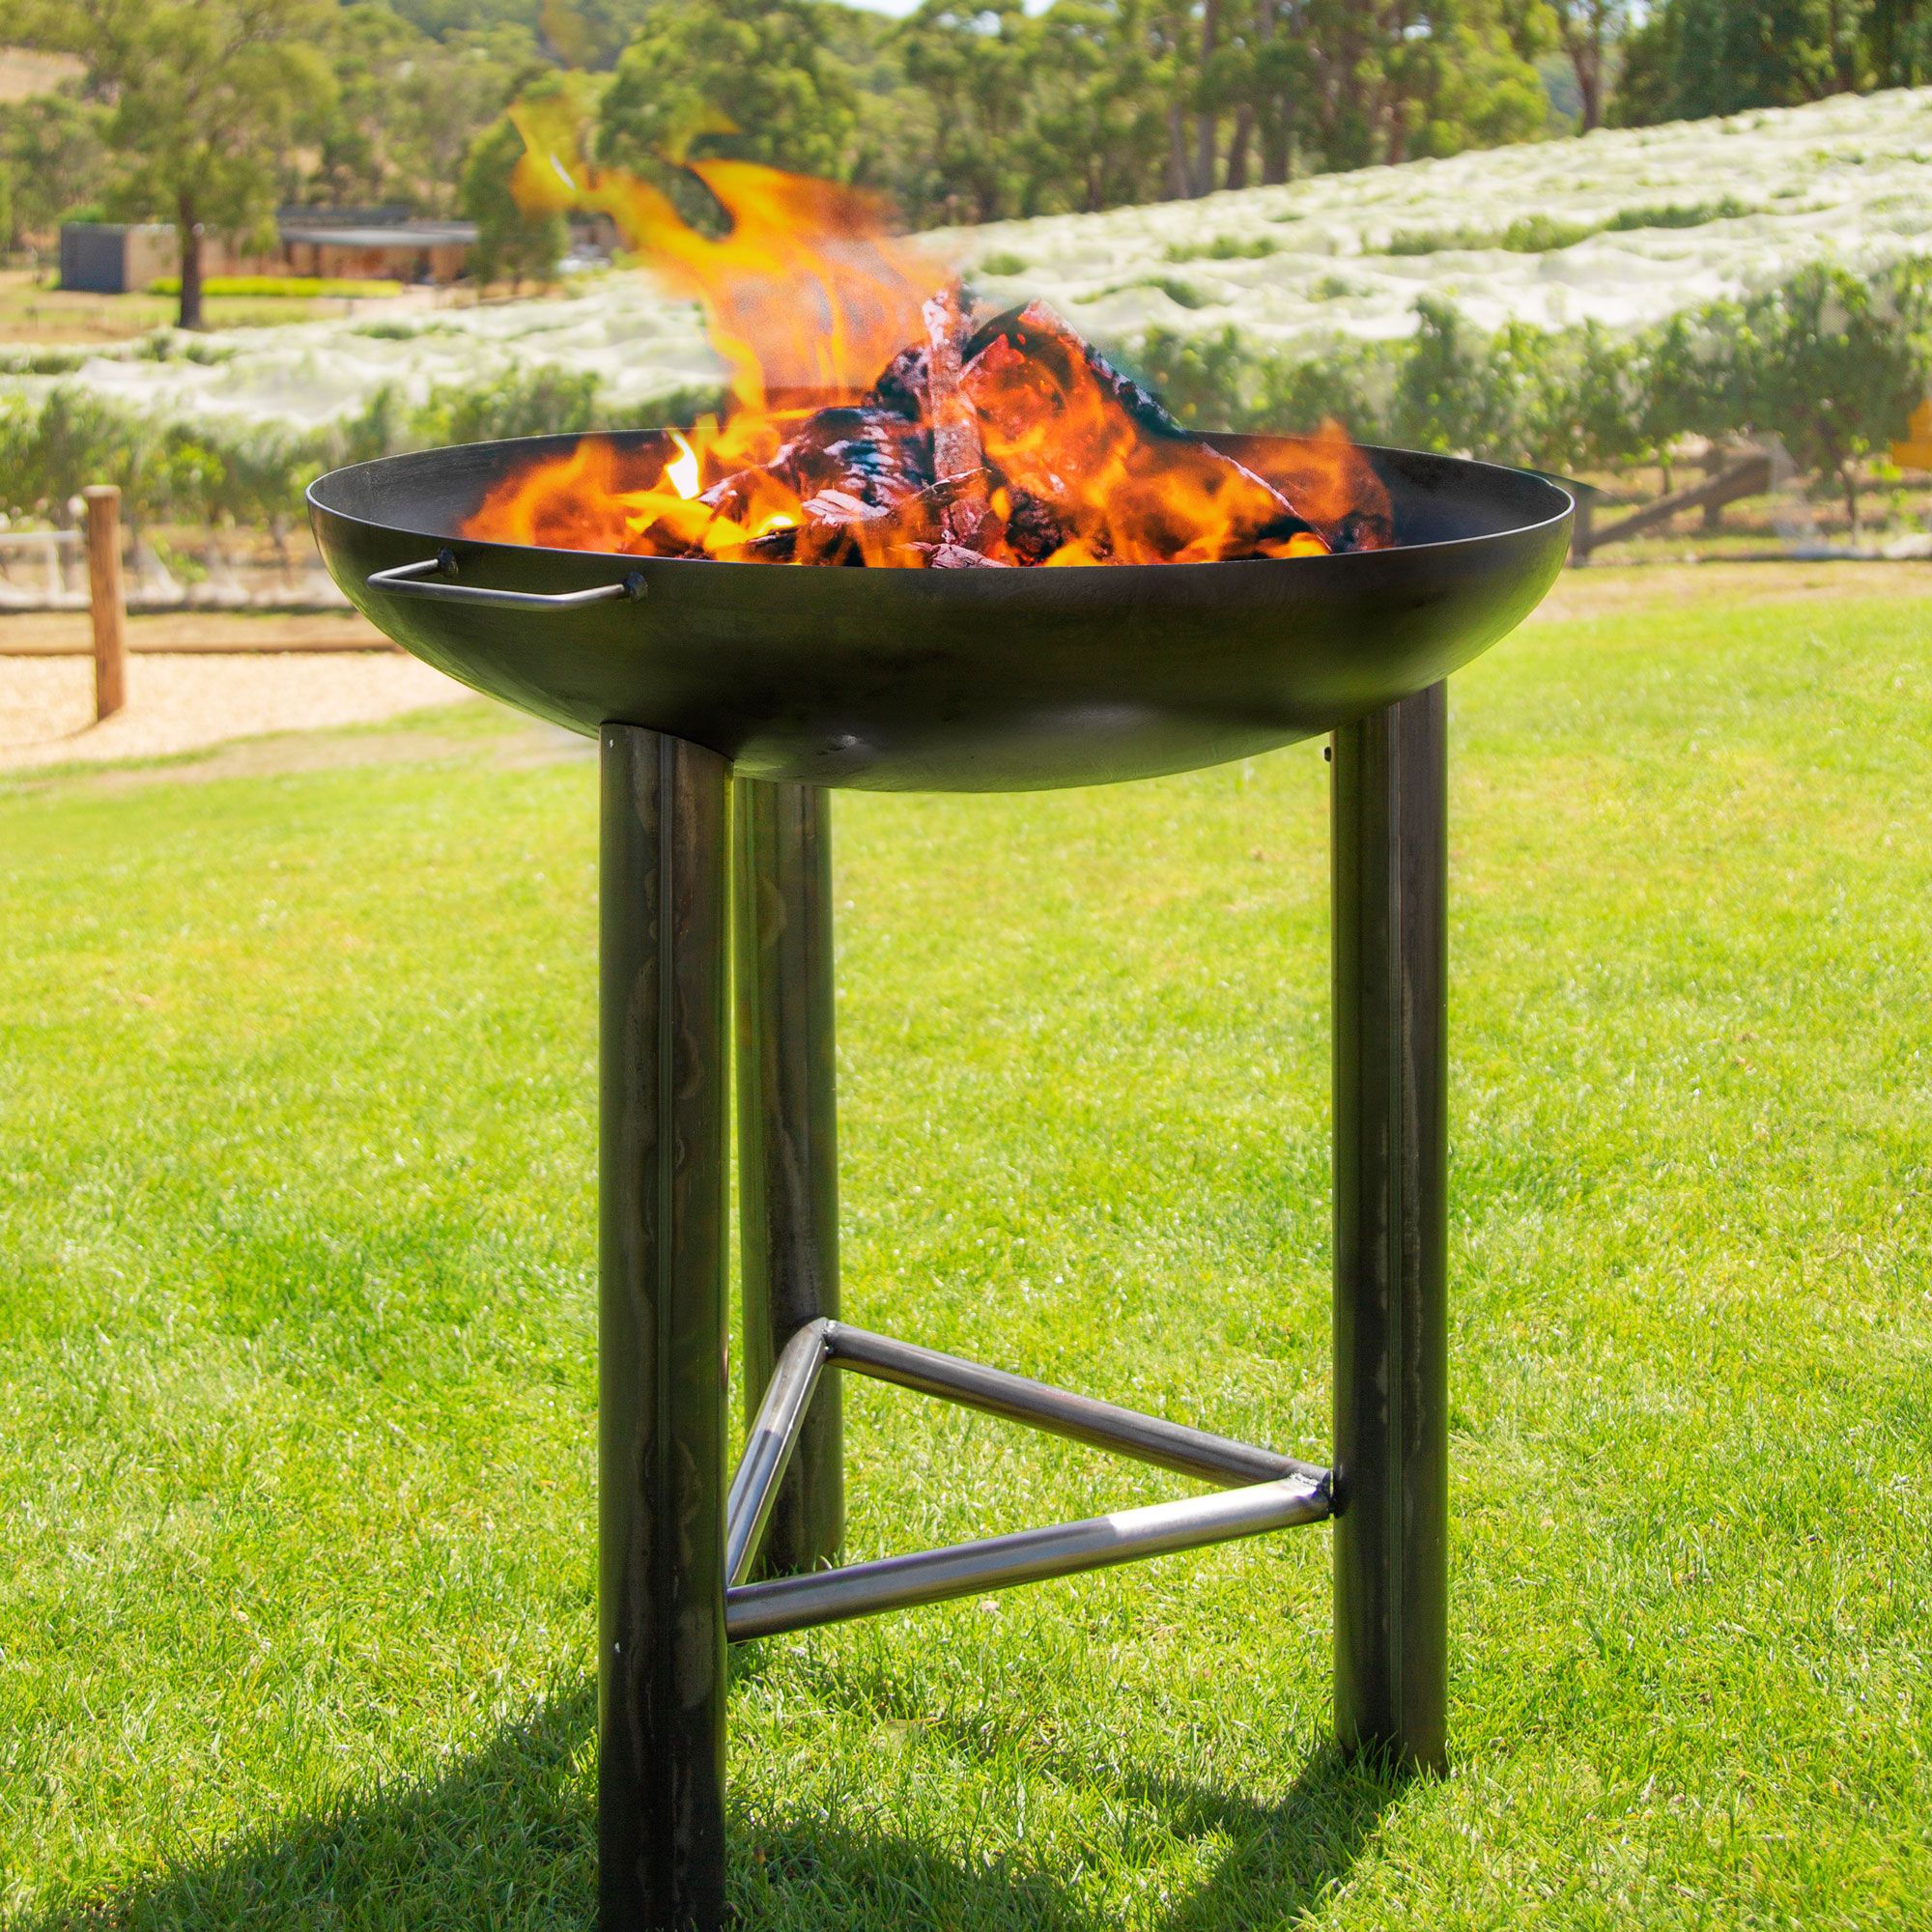 La Hacienda Pittsburgh Plancha 80cm Diameter Firepit with Cooking Surface / Grill